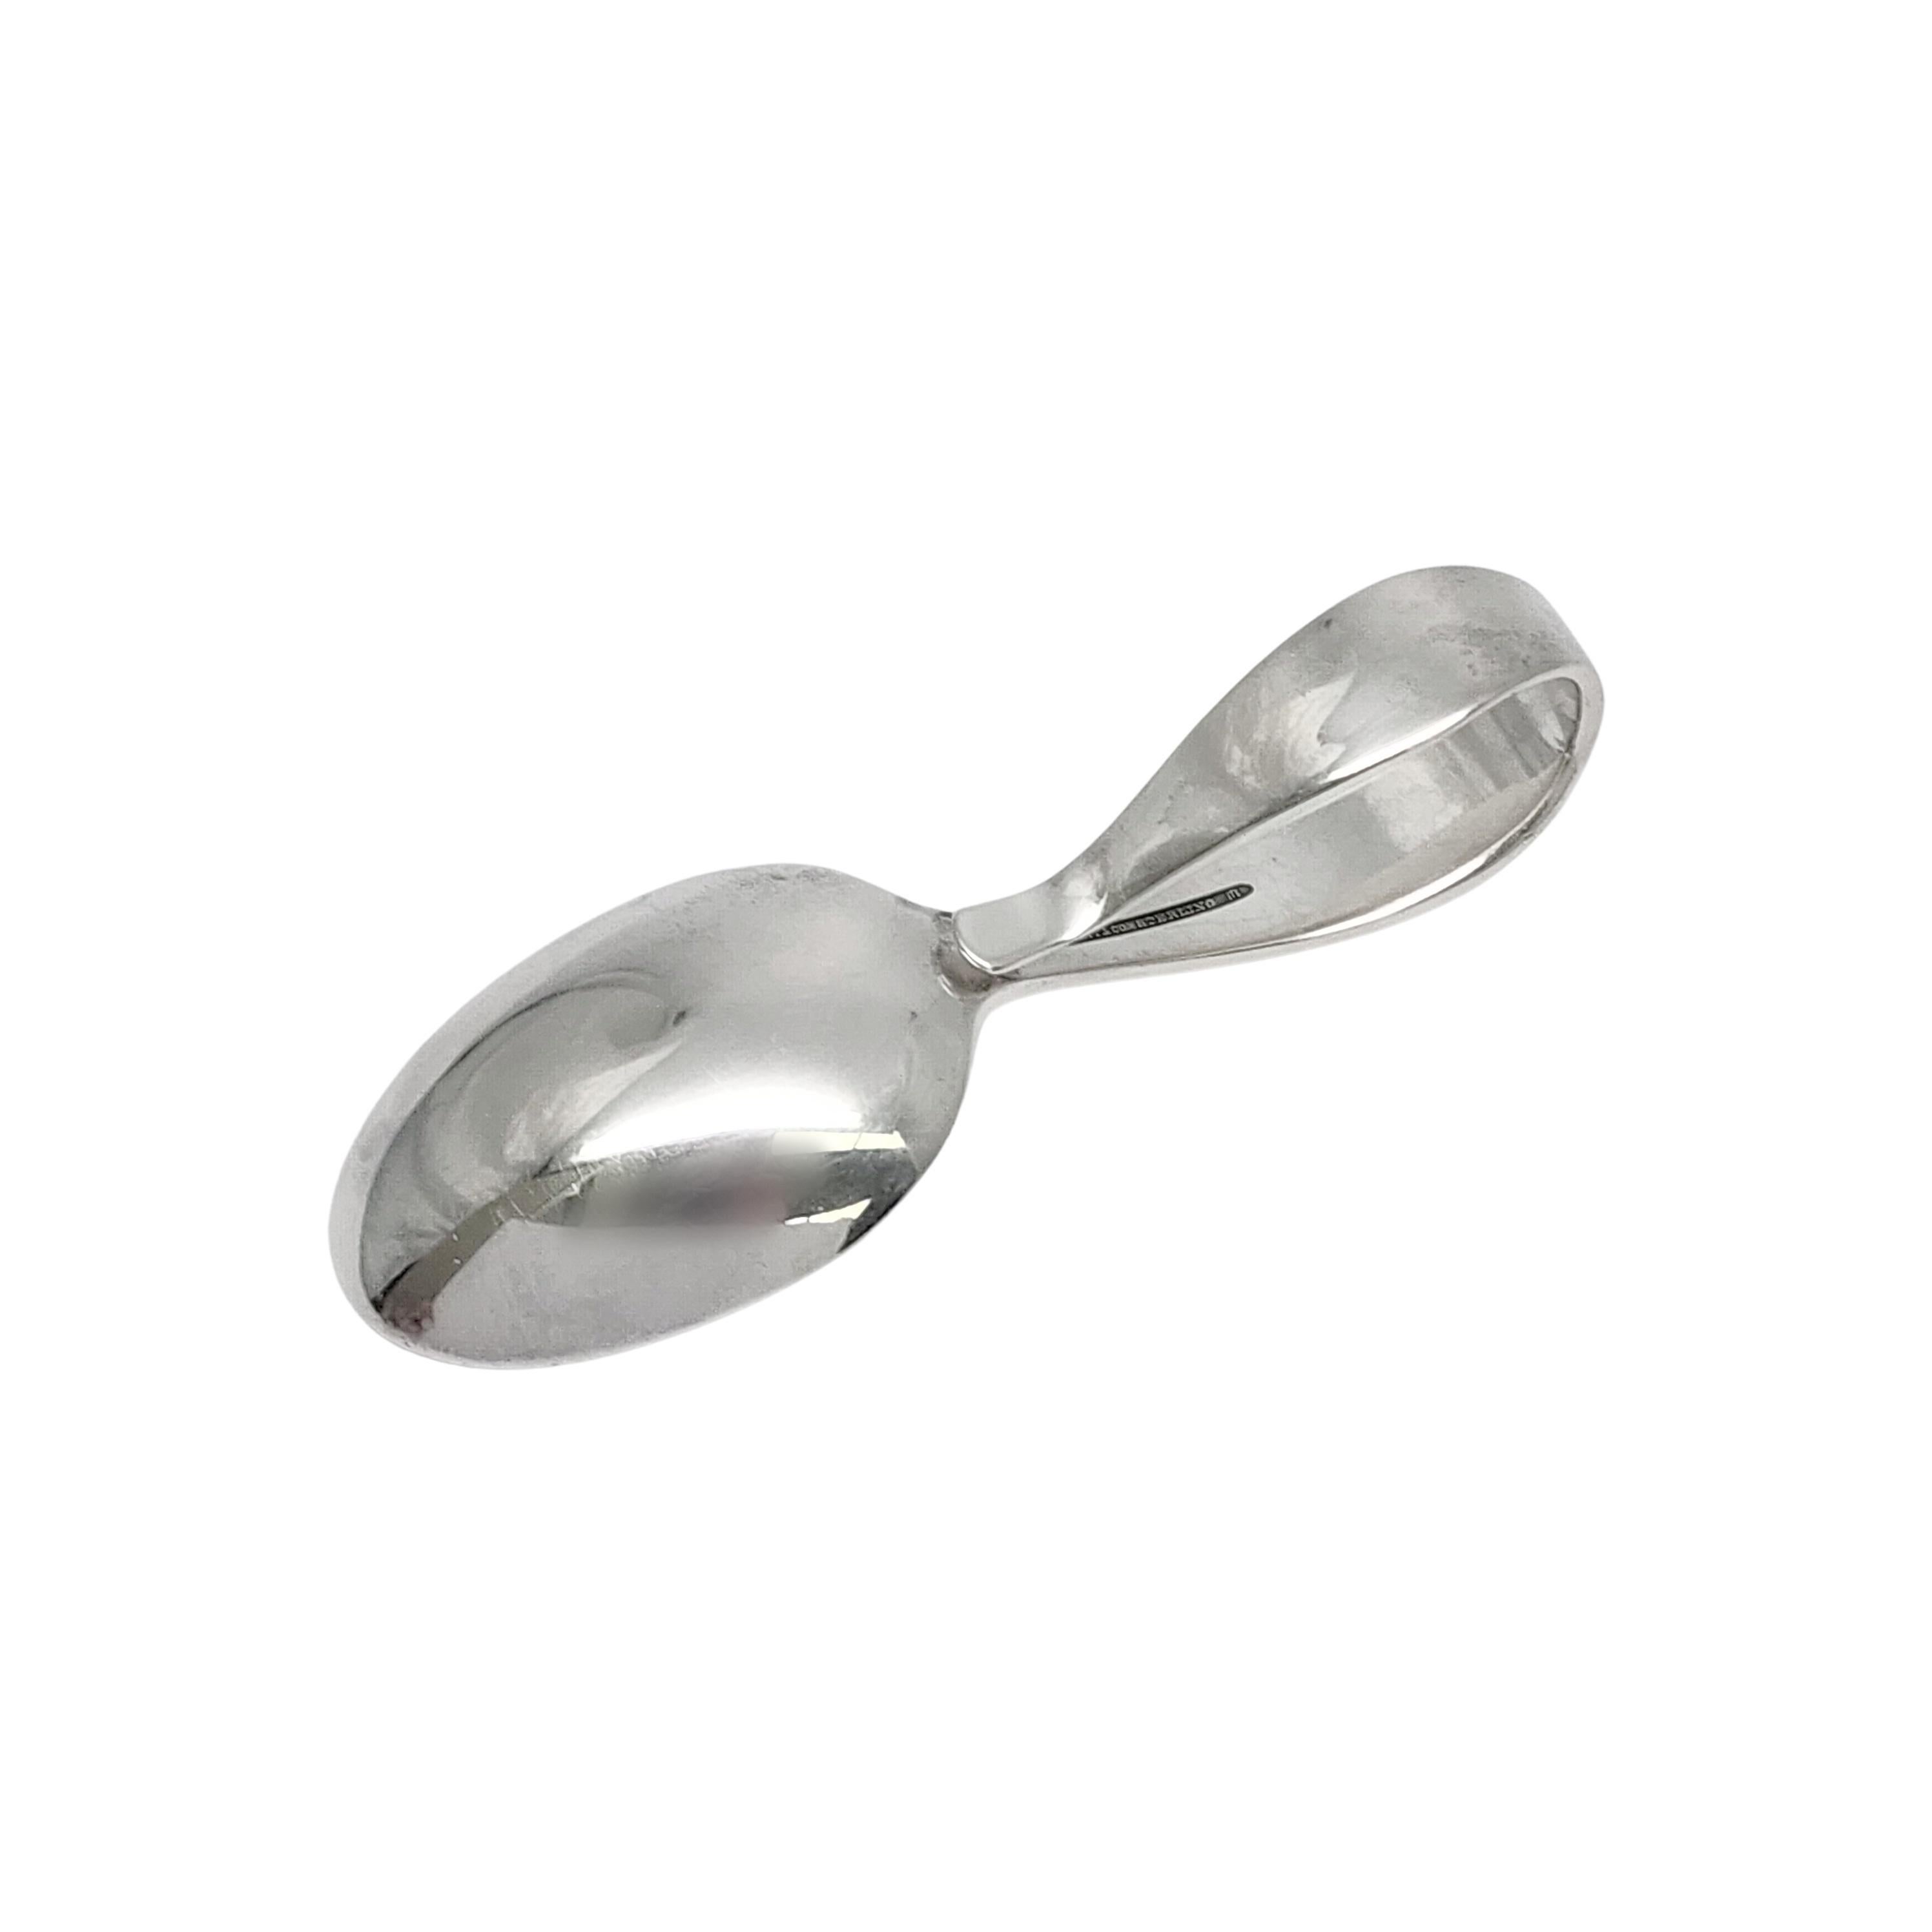 Sterling silver baby spoon with curved loop handle by Tiffany & Co with monogram.

Monogram appears to be LBS (see photos)

Timeless small baby/child feeding spoon featuring a curved loop handle. Hallmarks date this piece to manufacture under the